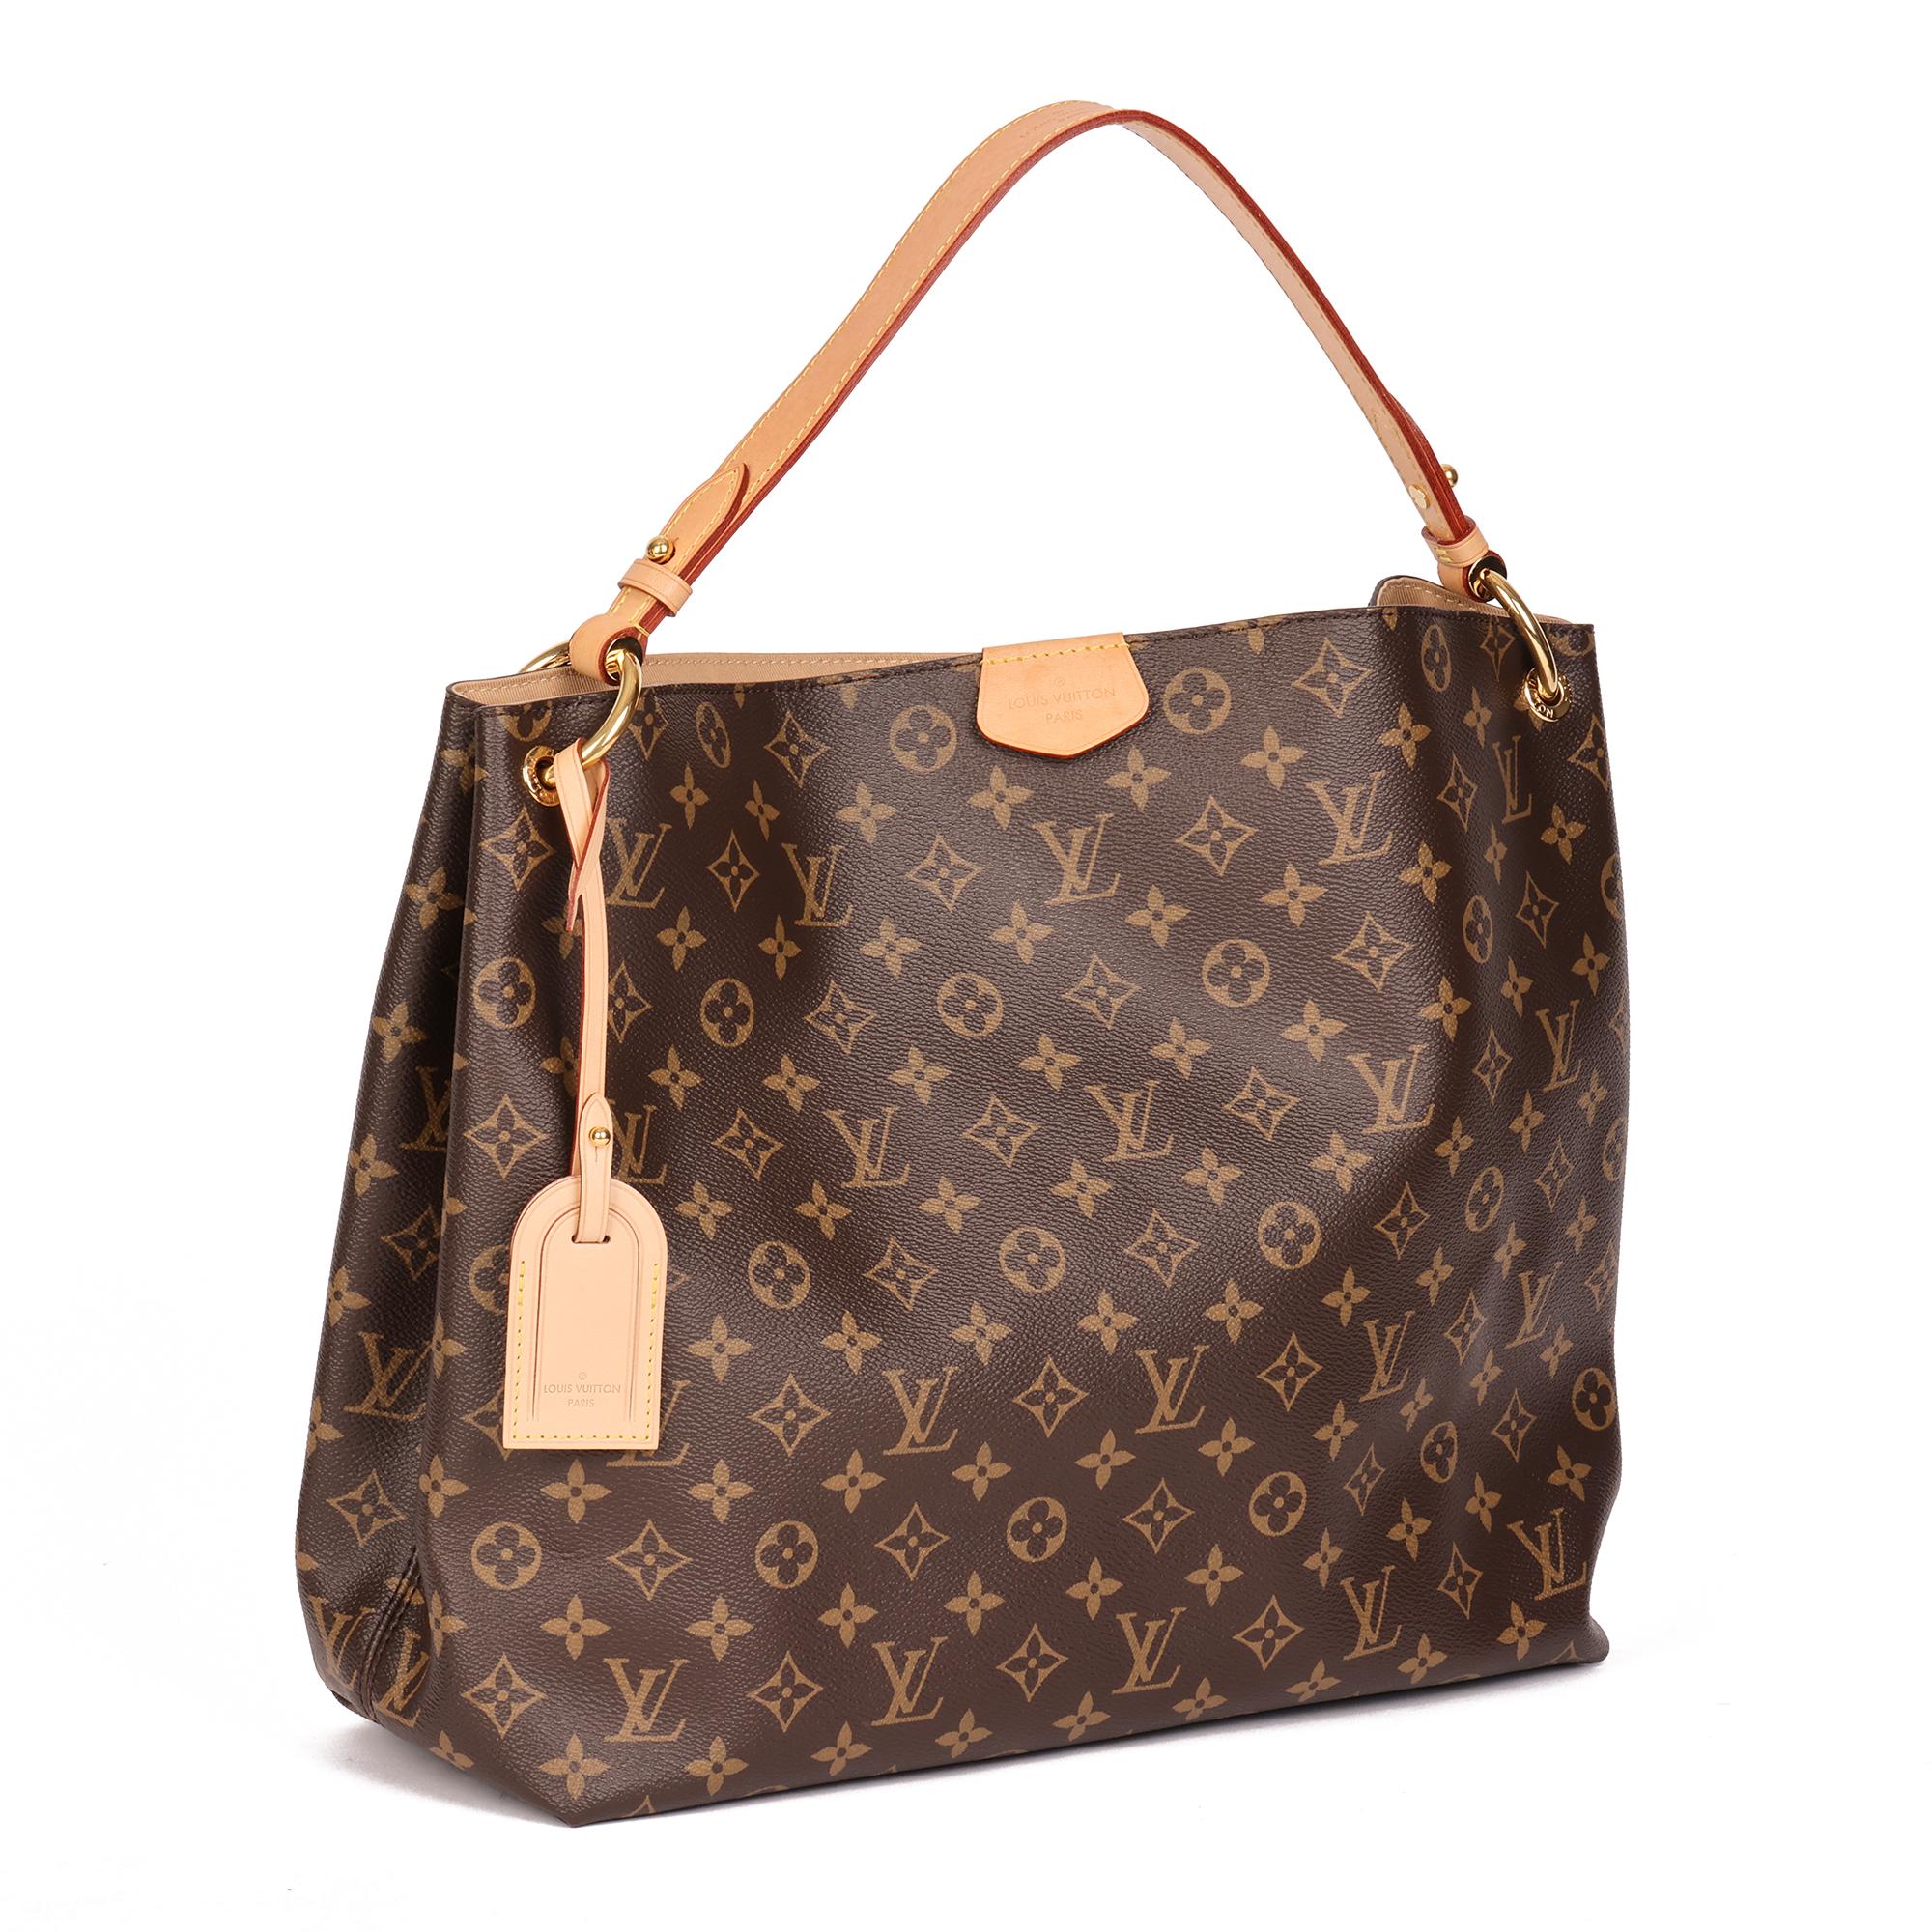 LOUIS VUITTON
Brown Monogram Coated Canvas & Natural Calfskin Leather Graceful MM

Xupes Reference: CB599
Serial Number: MI1118
Age (Circa): 2018
Accompanied By: Louis Vuitton Dust Bag, Receipt
Authenticity Details: Date Stamp (Made in